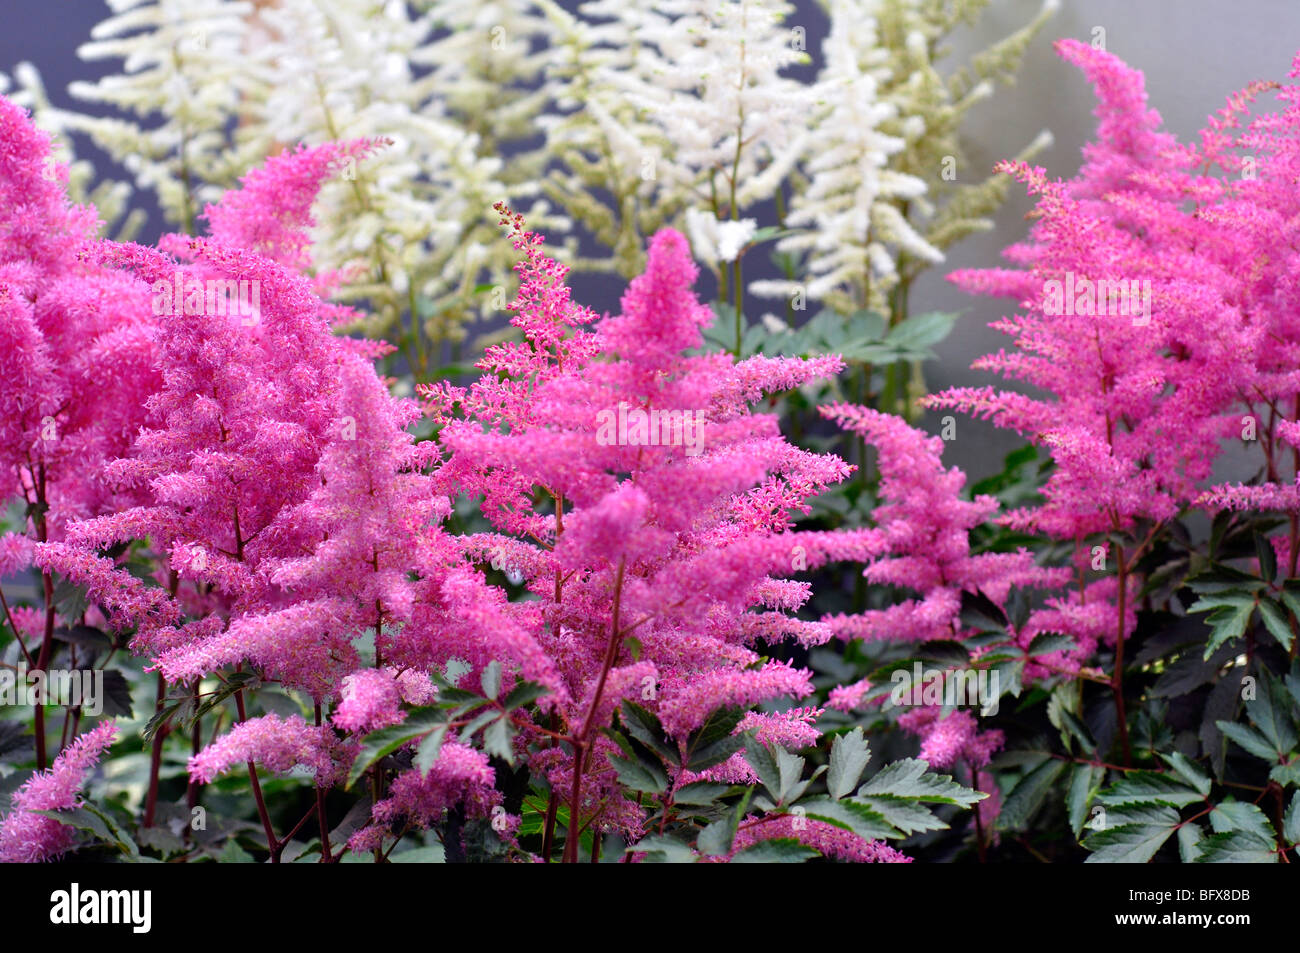 Pink Astilbe Flowers (Astilbe arendsii) Stock Photo